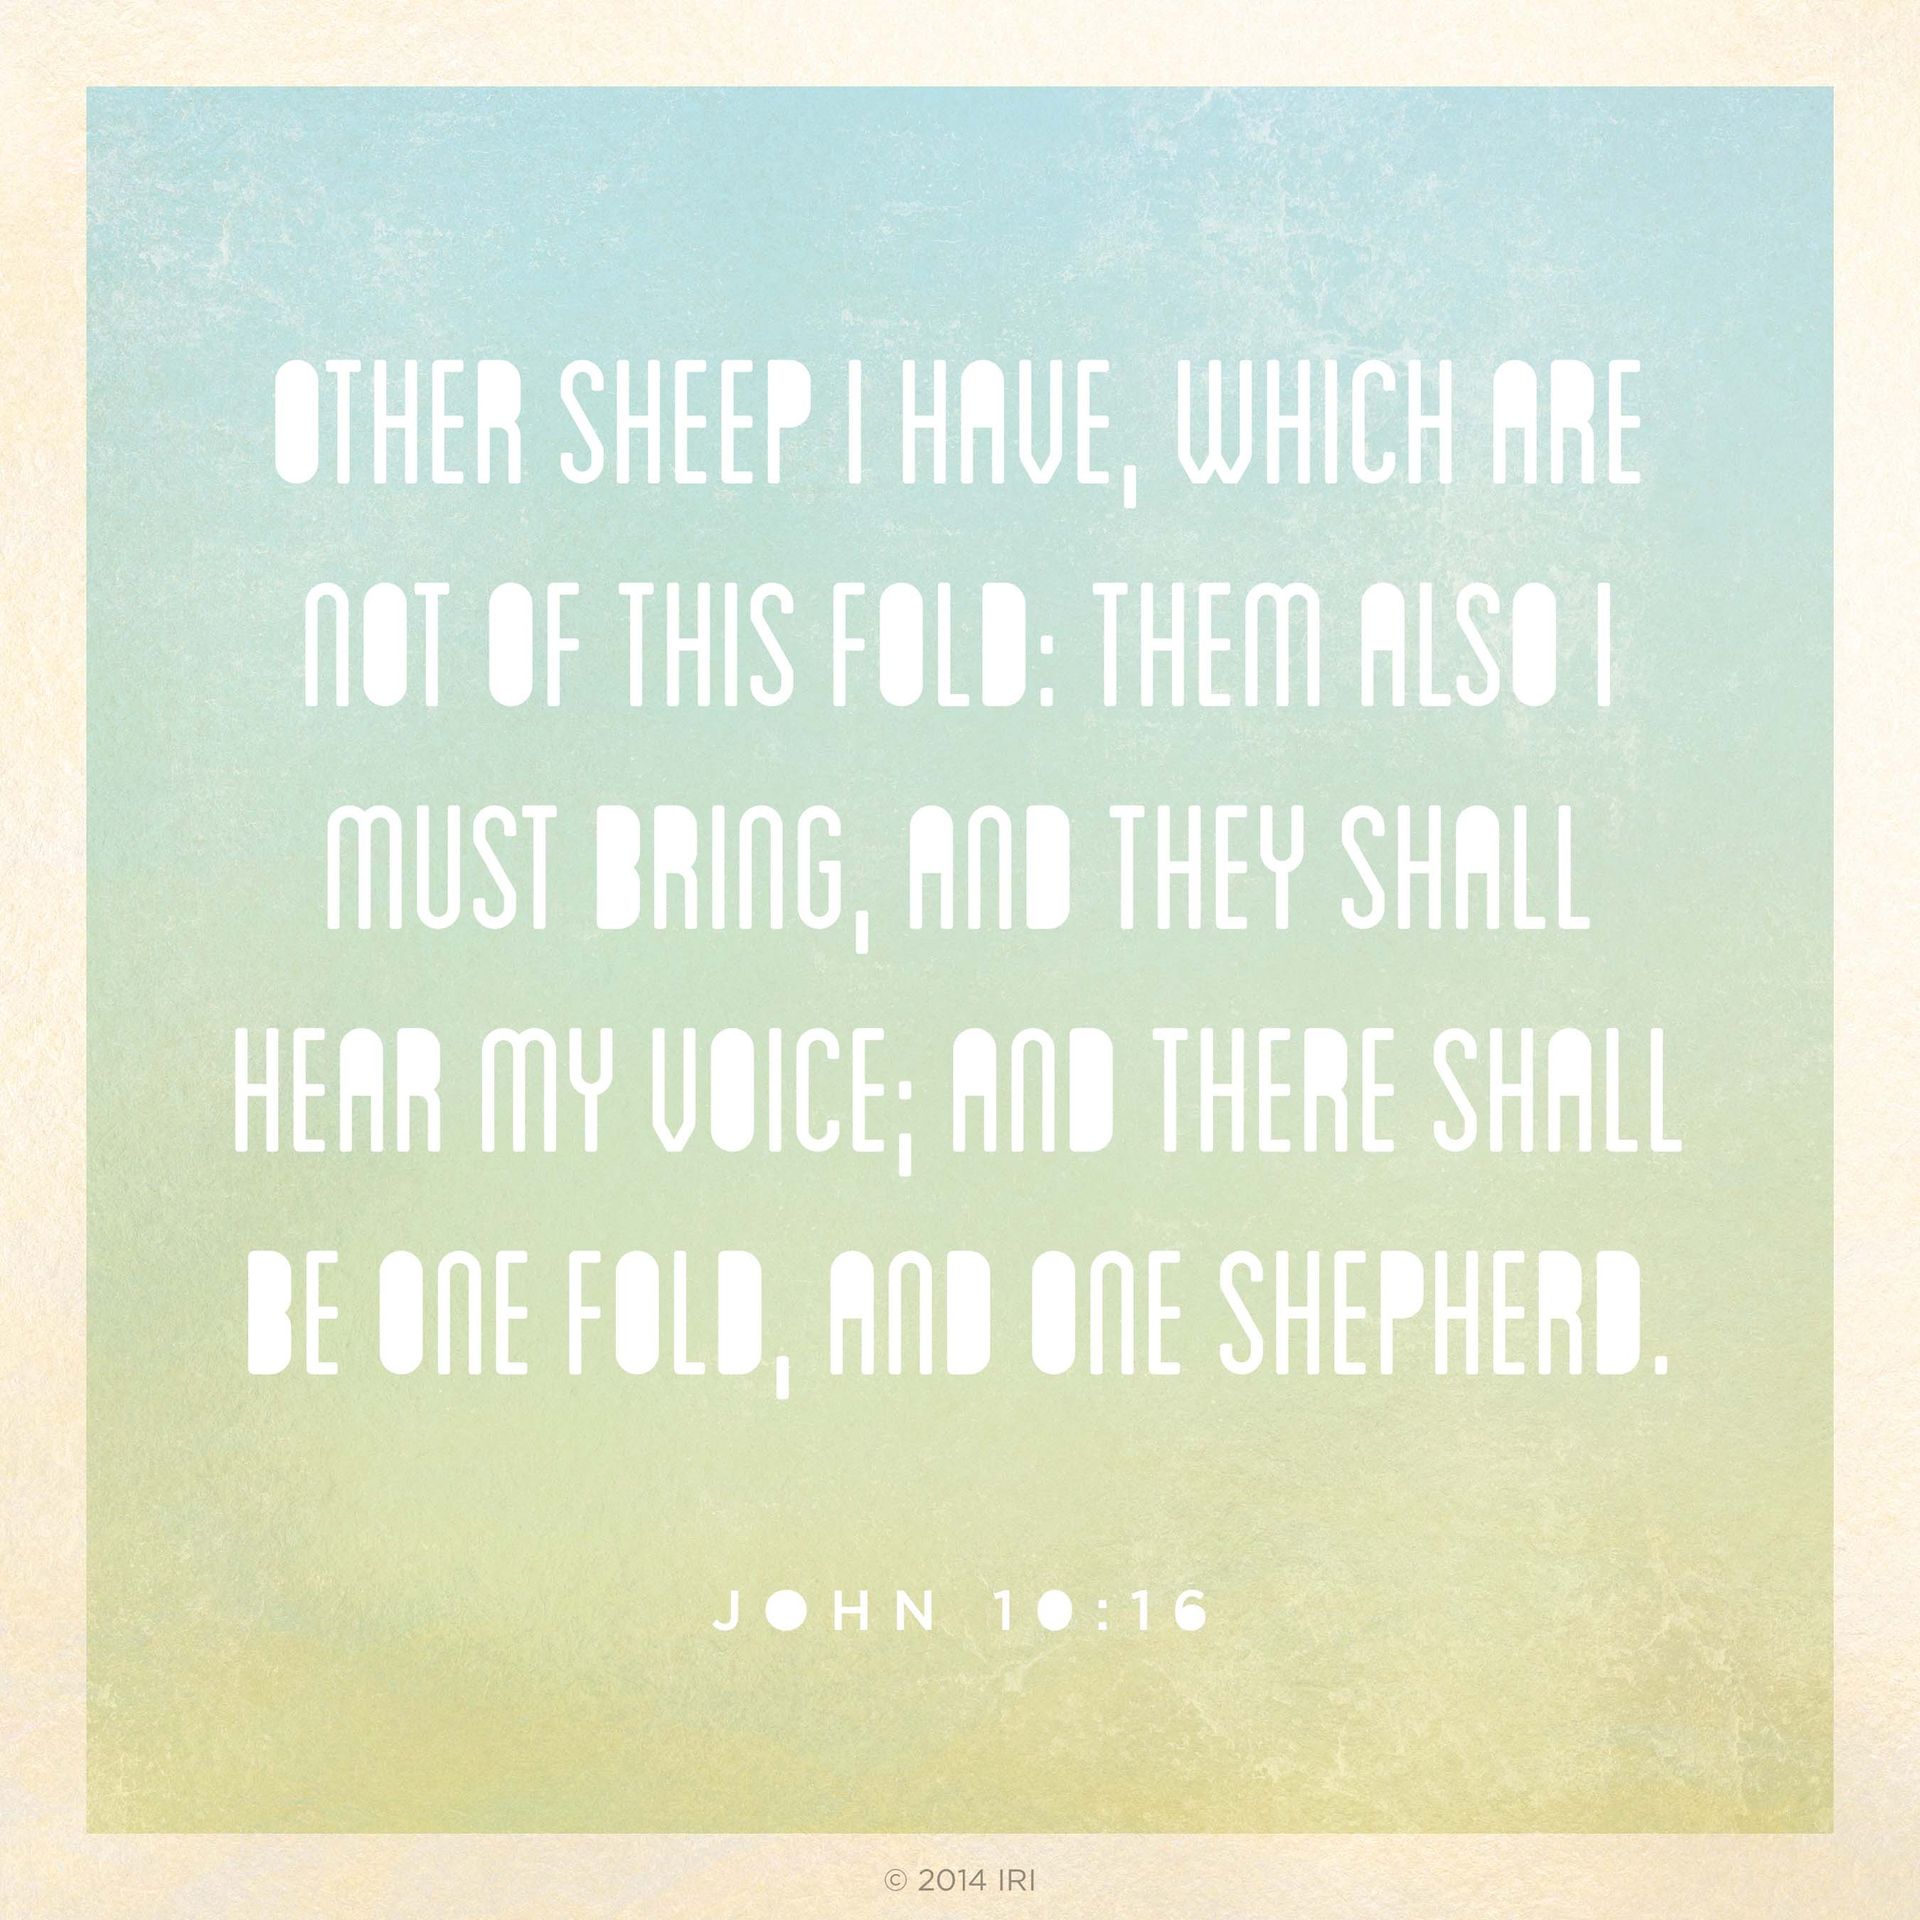 “Other sheep I have, which are not of this fold: them also I must bring, and they shall hear my voice; and there shall be one fold, and one shepherd.”—John 10:16